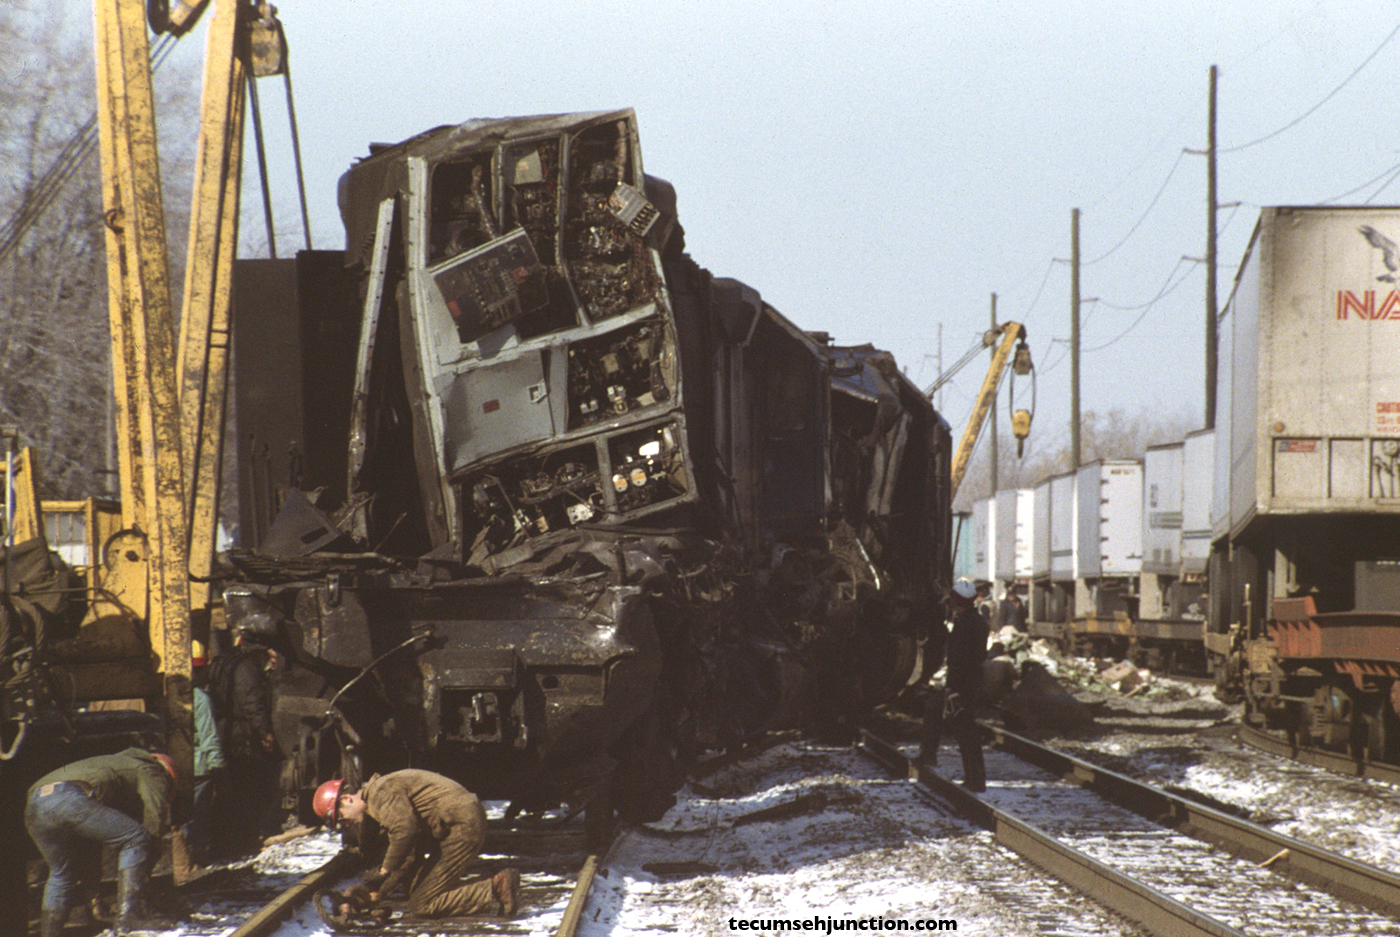 The remains of Conrail #3211